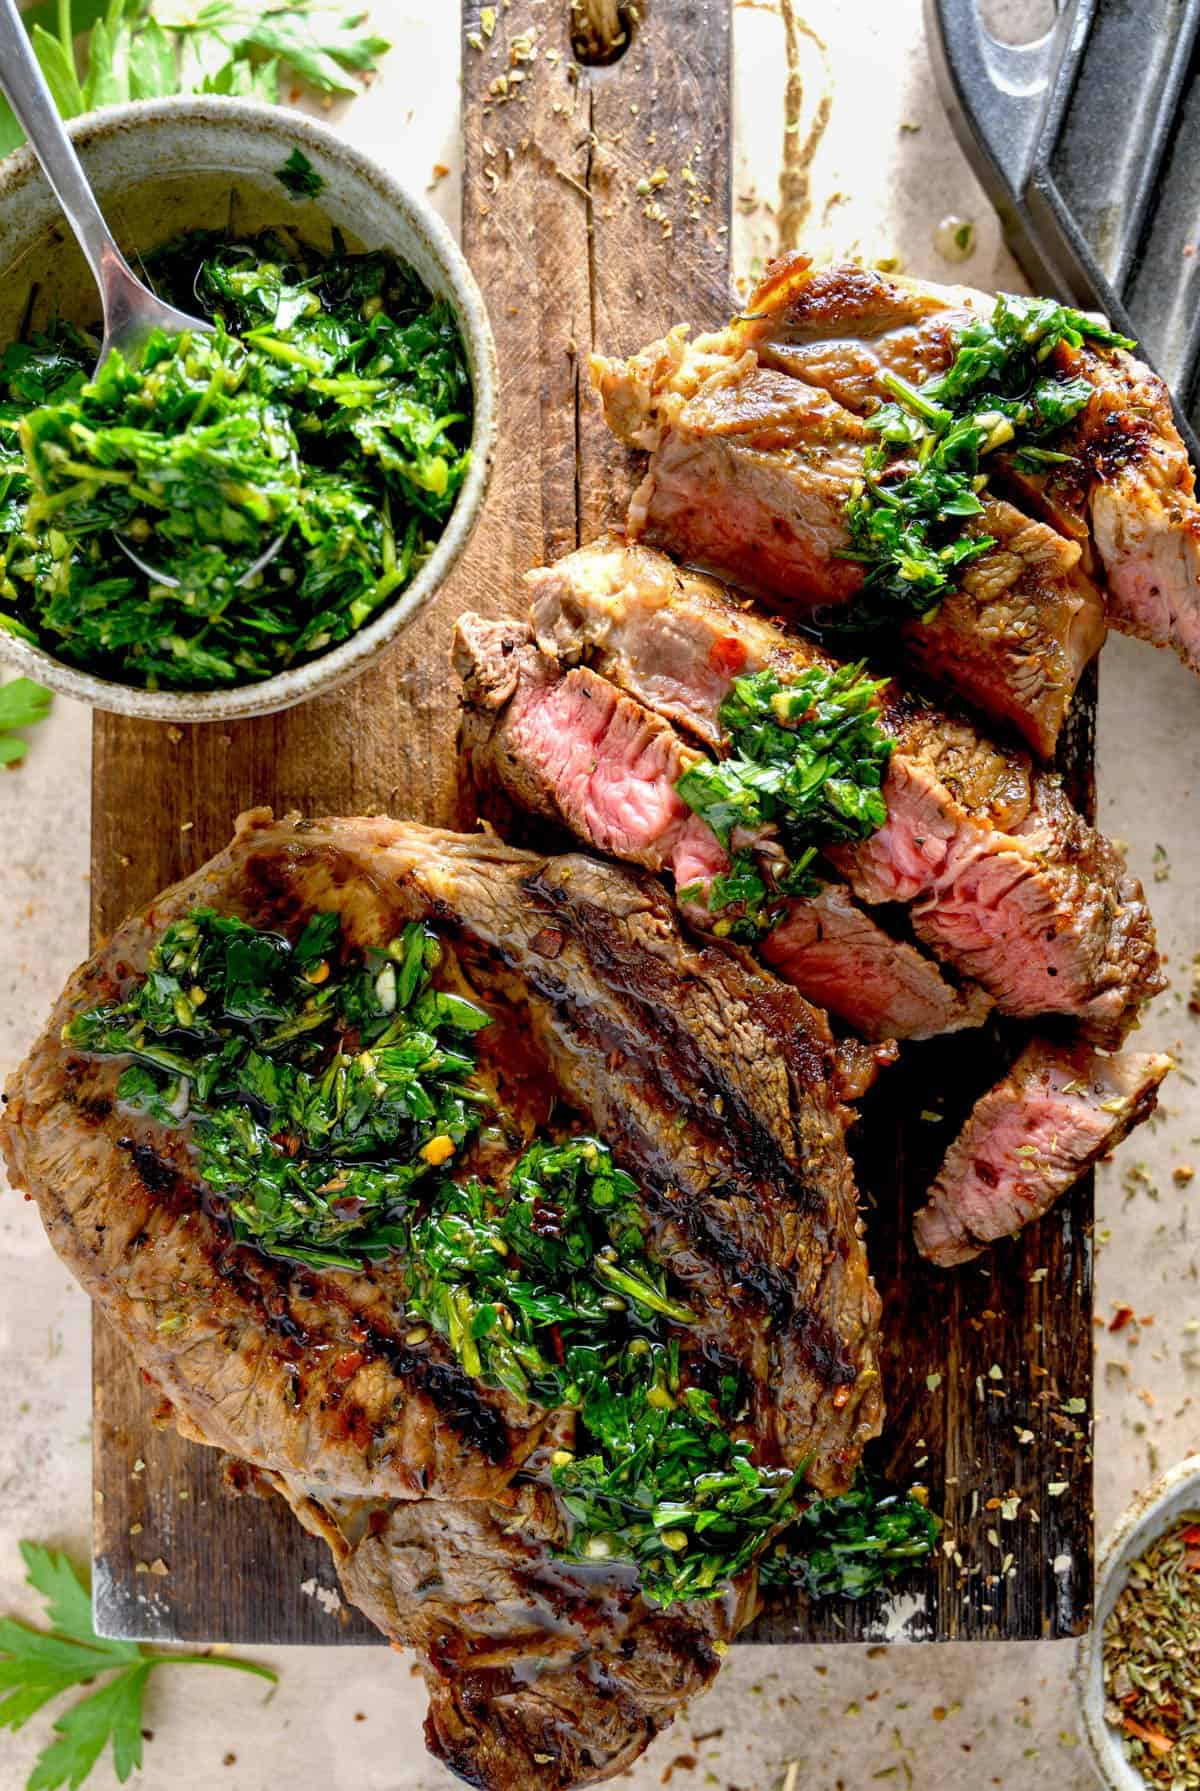 A grilled steak with chimichurri sauce on it and in a bowl next to it on a cutting board.